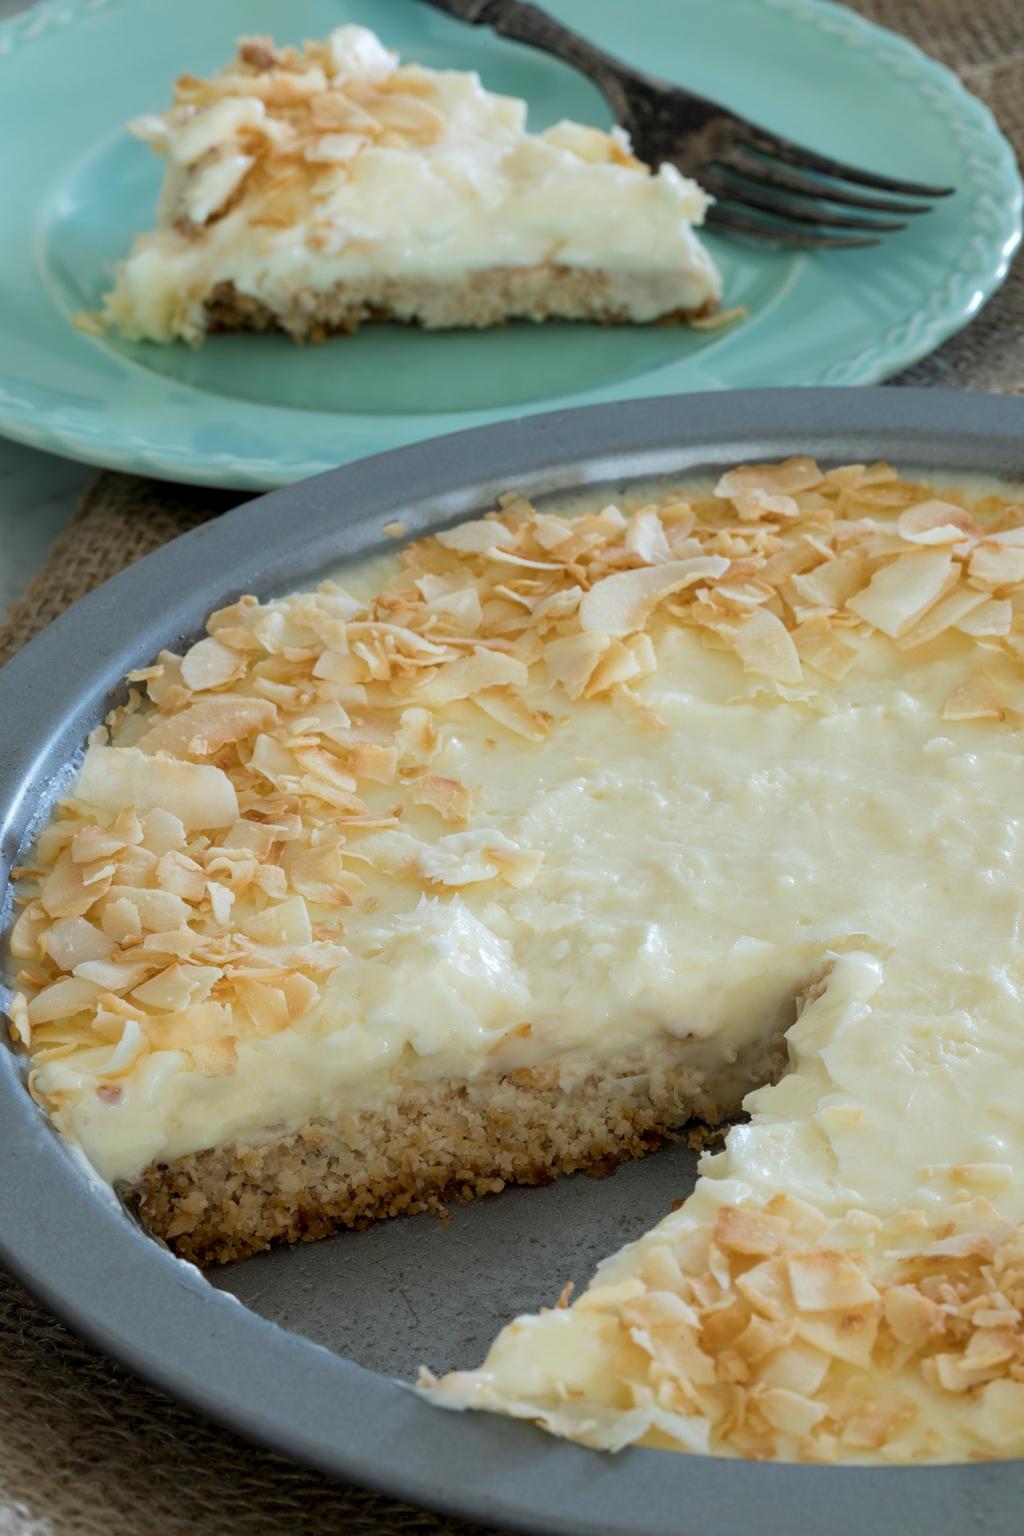 Coconut Cream Pie The perfect combination of crispy and crunchy paired with smooth and creamy! This coconut cream pie is everything you re dreaming of!